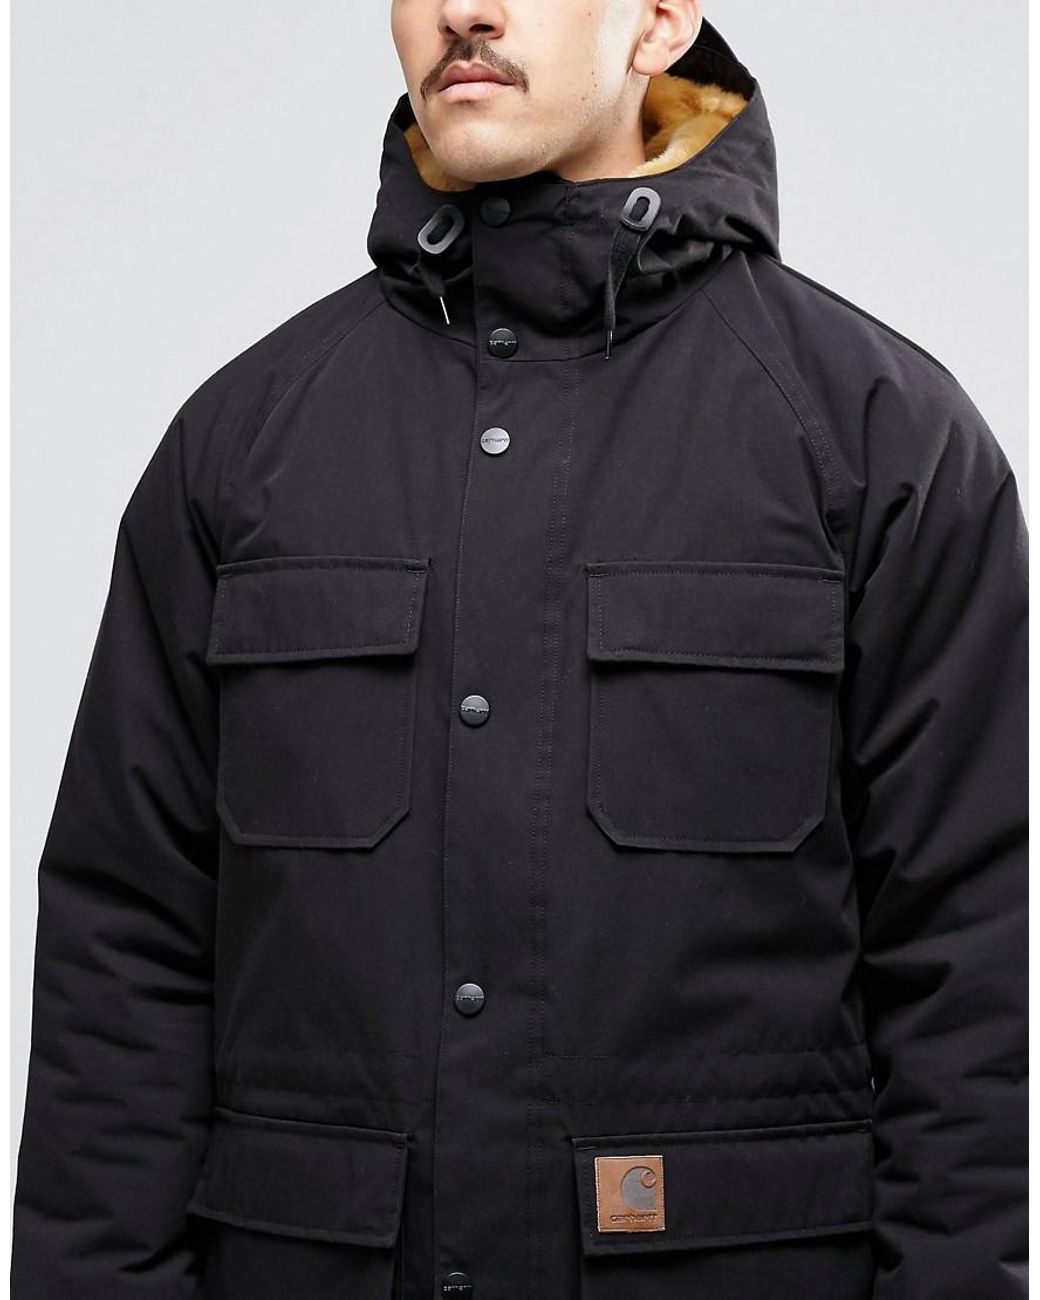 Carhartt WIP Mentley Jacket With Faux Fur Lining in Black for Men | Lyst